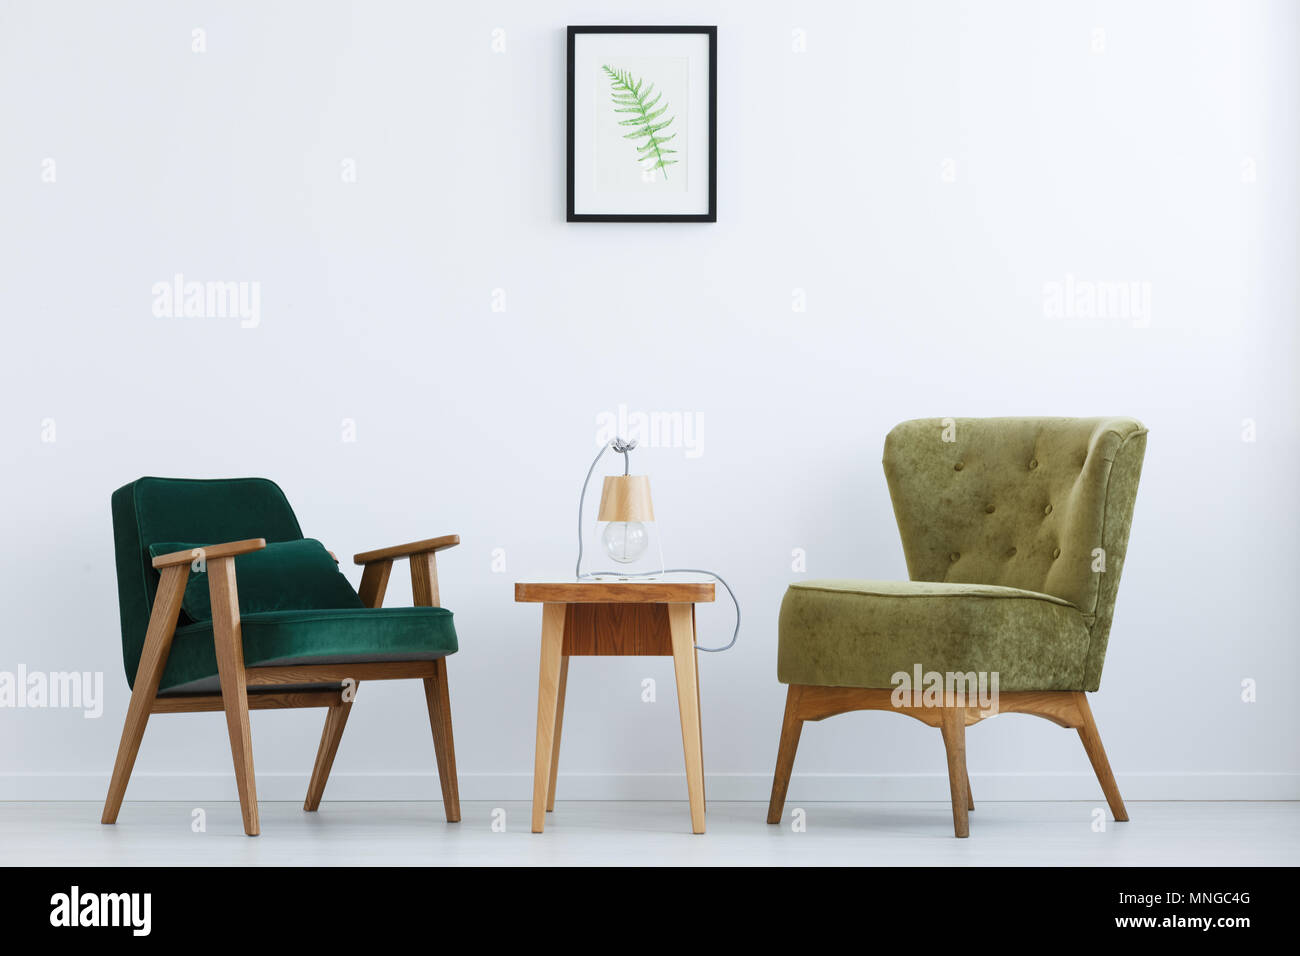 Ascetic, white home interior with green chairs, table and lamp Stock Photo